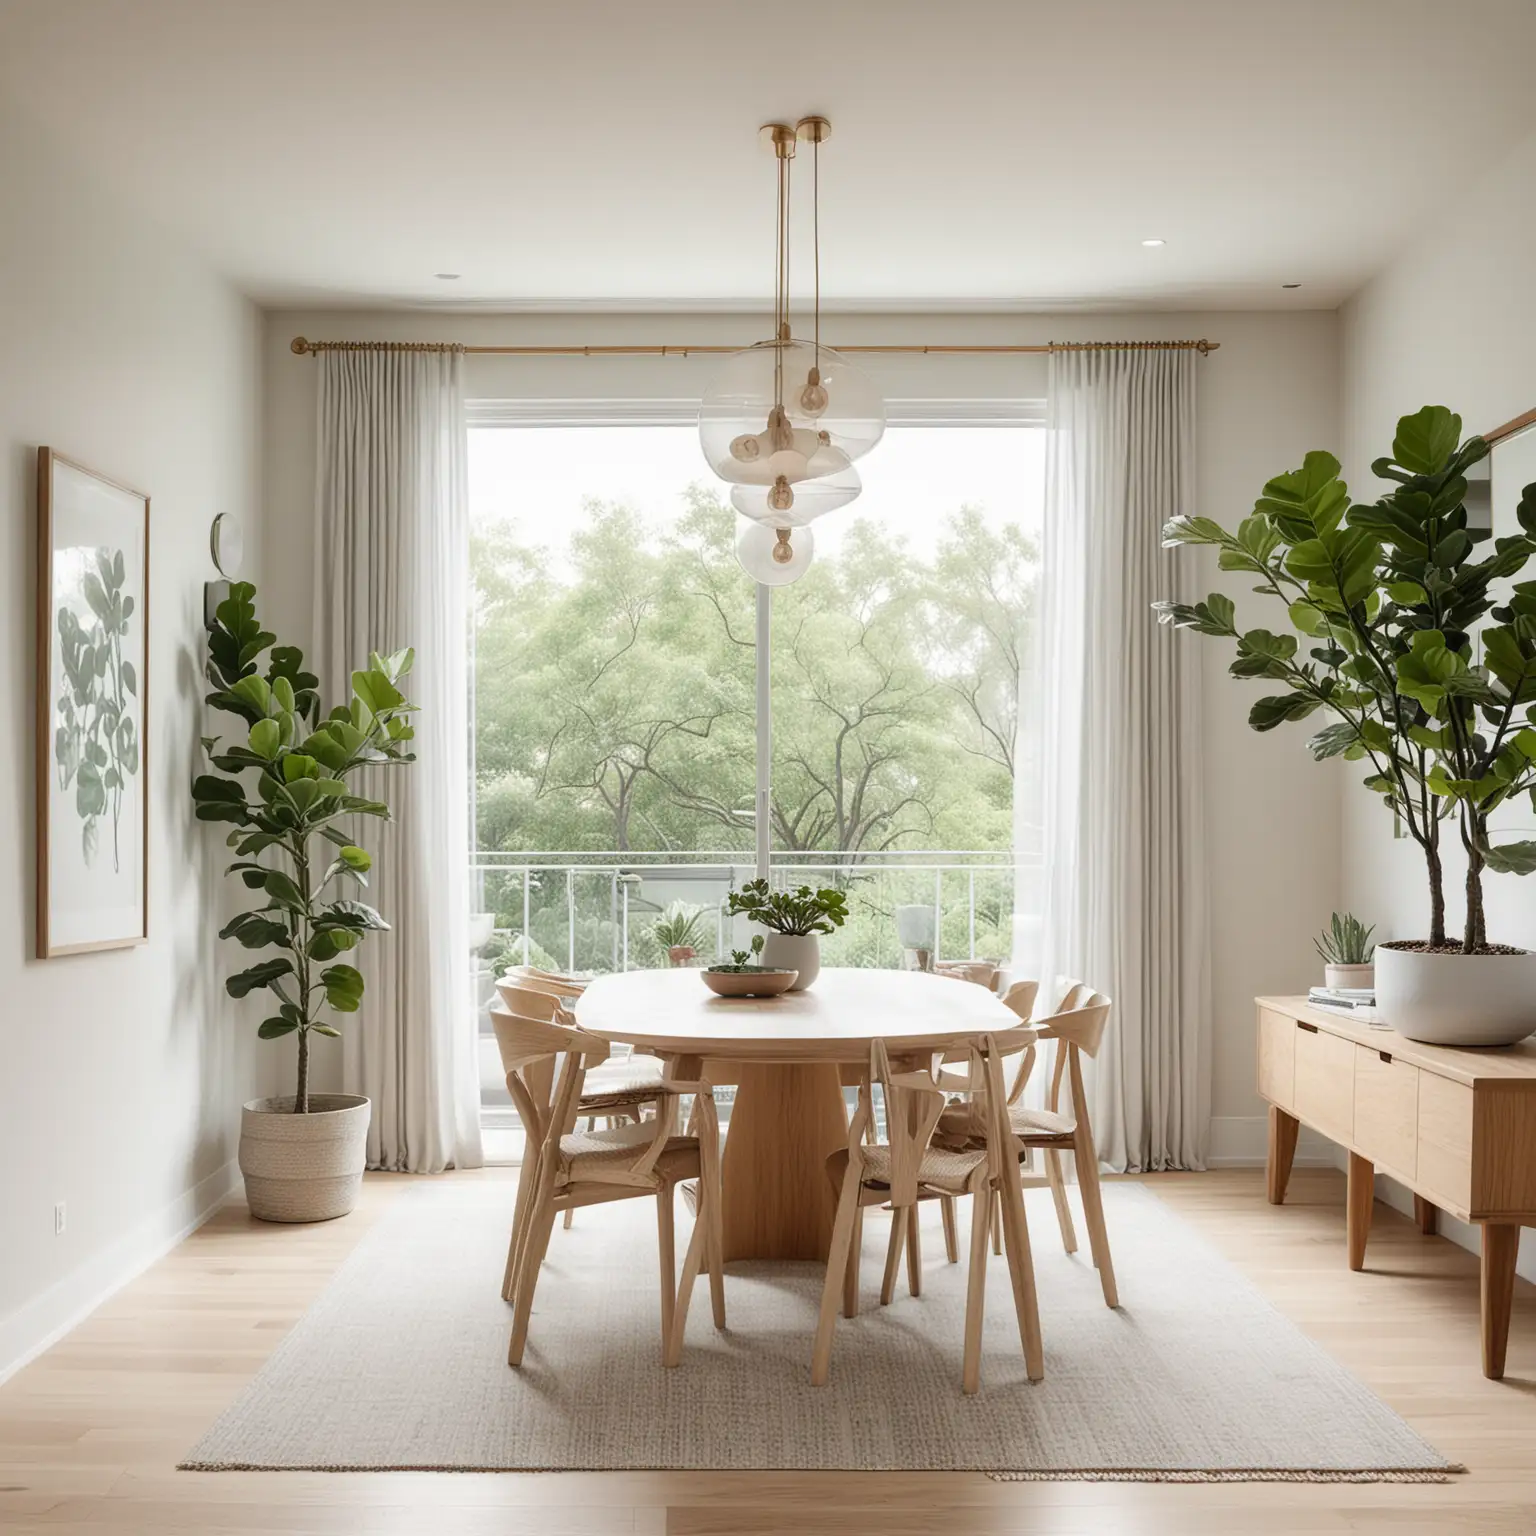 design a very wide distant shot of Minimalist Dining Room:  Soft neutral palette with light gray walls. Scandinavian-style light wood dining table and four slim chairs. Large floor-to-ceiling windows with sheer white curtains. Contemporary pendant light fixture above the table. Potted plants (fiddle leaf fig and succulents) in white ceramic pots. Light oak flooring with a soft gray area rug.